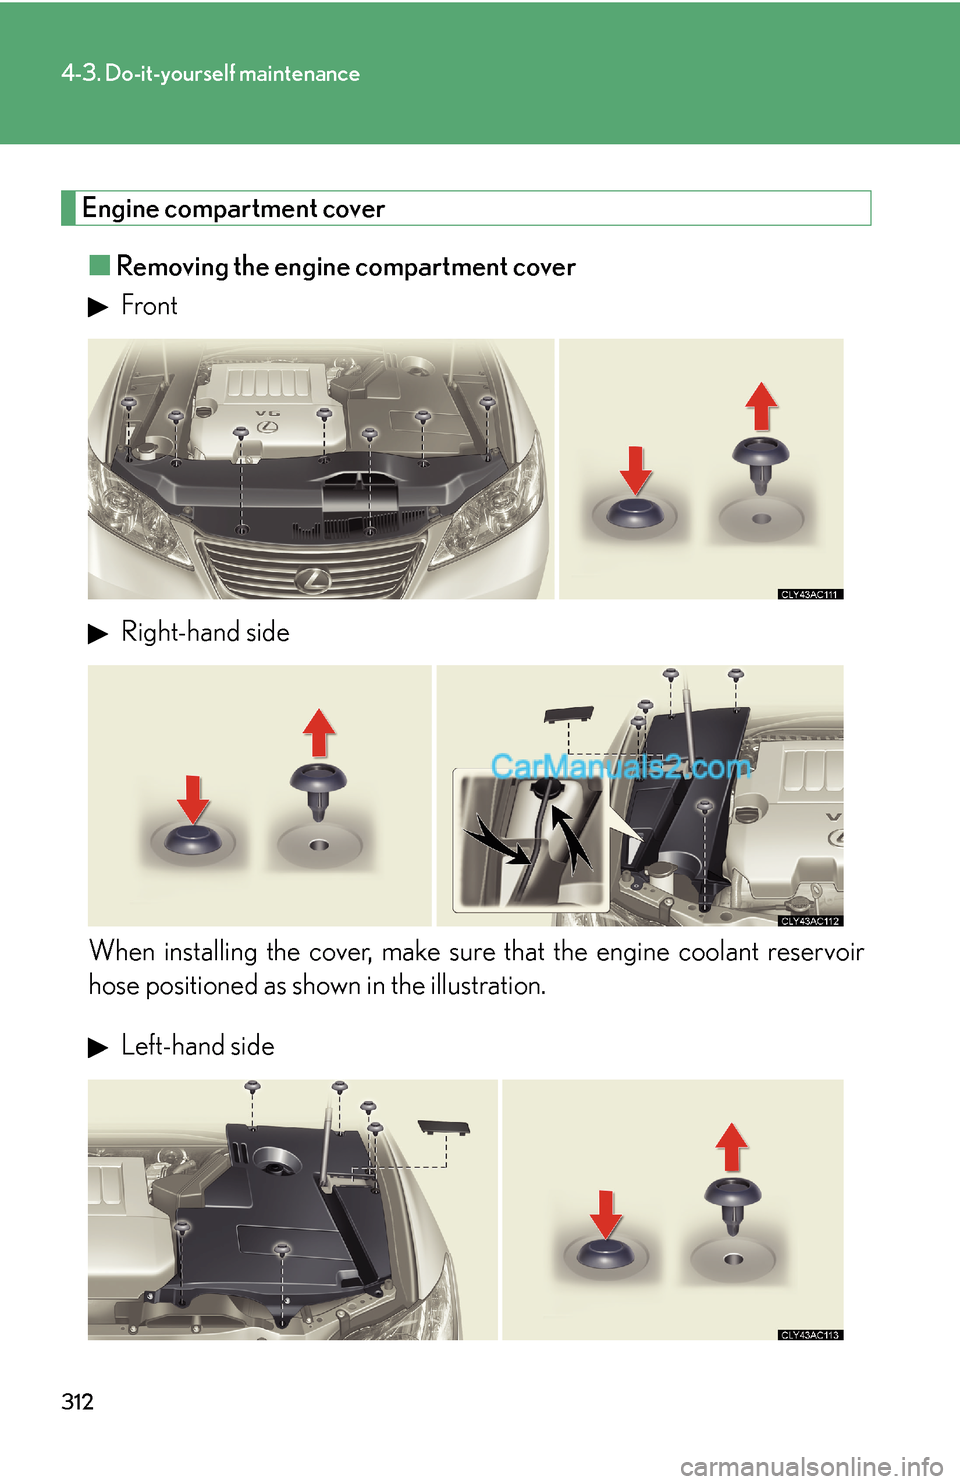 Lexus ES350 2009  Do-it-yourself maintenance 312
4-3. Do-it-yourself maintenance
Engine compartment cover
■Removing the engine compartment cover
 Front
 Right-hand side
When installing the cover, make sure that the engine coolant reservoir
hos